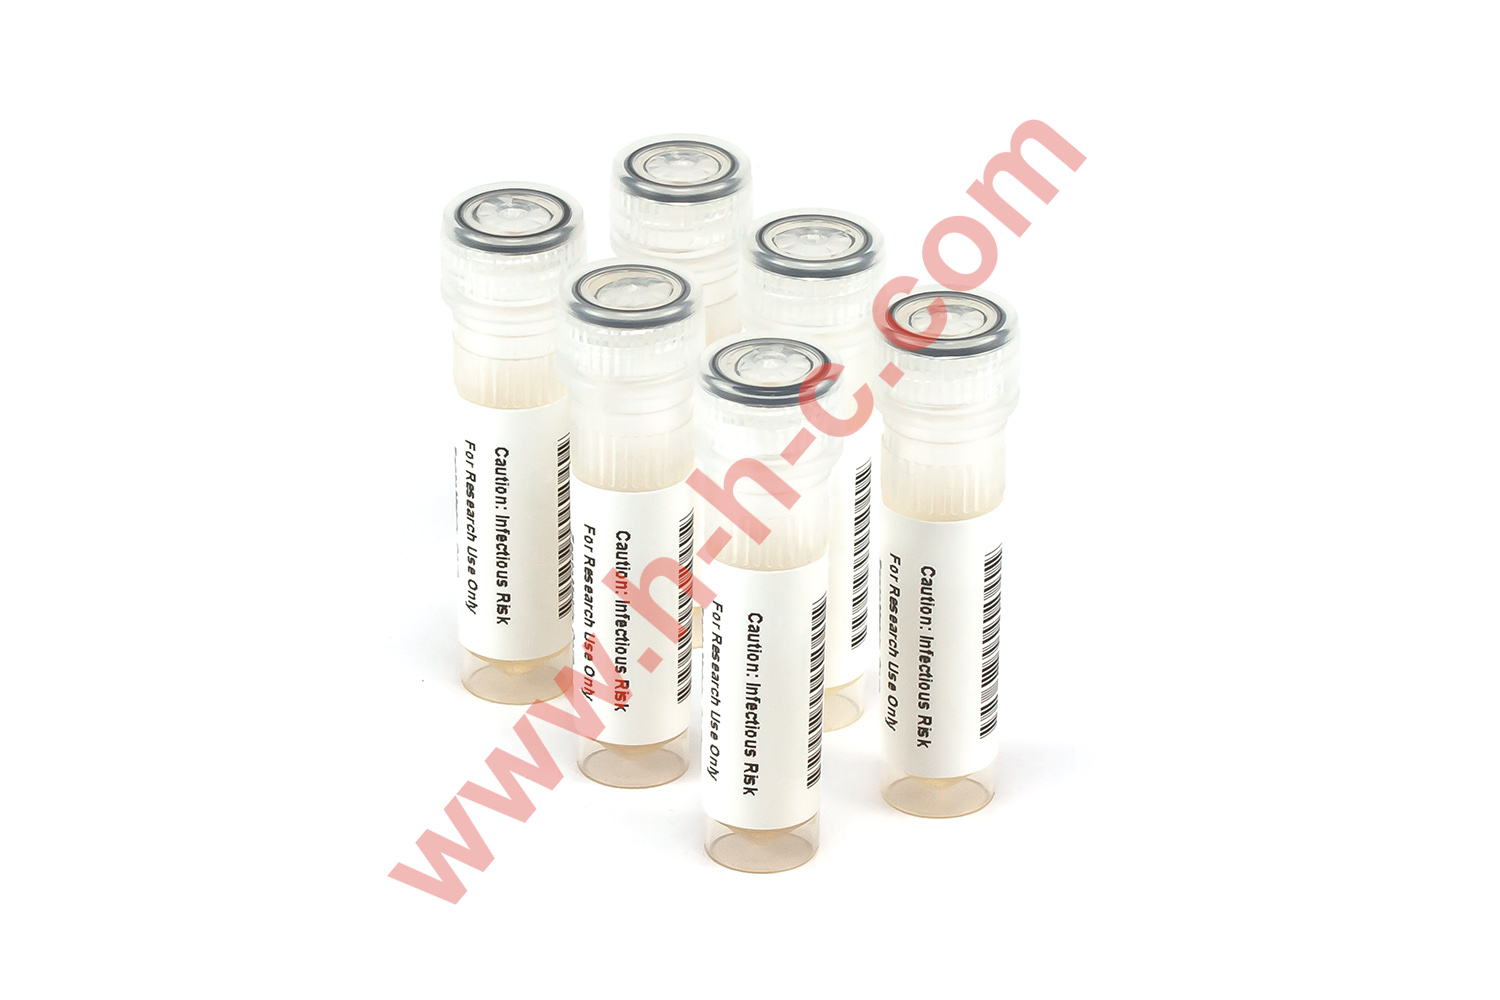 NATtrol Neisseria gonorrhoeae Positive Control Pack